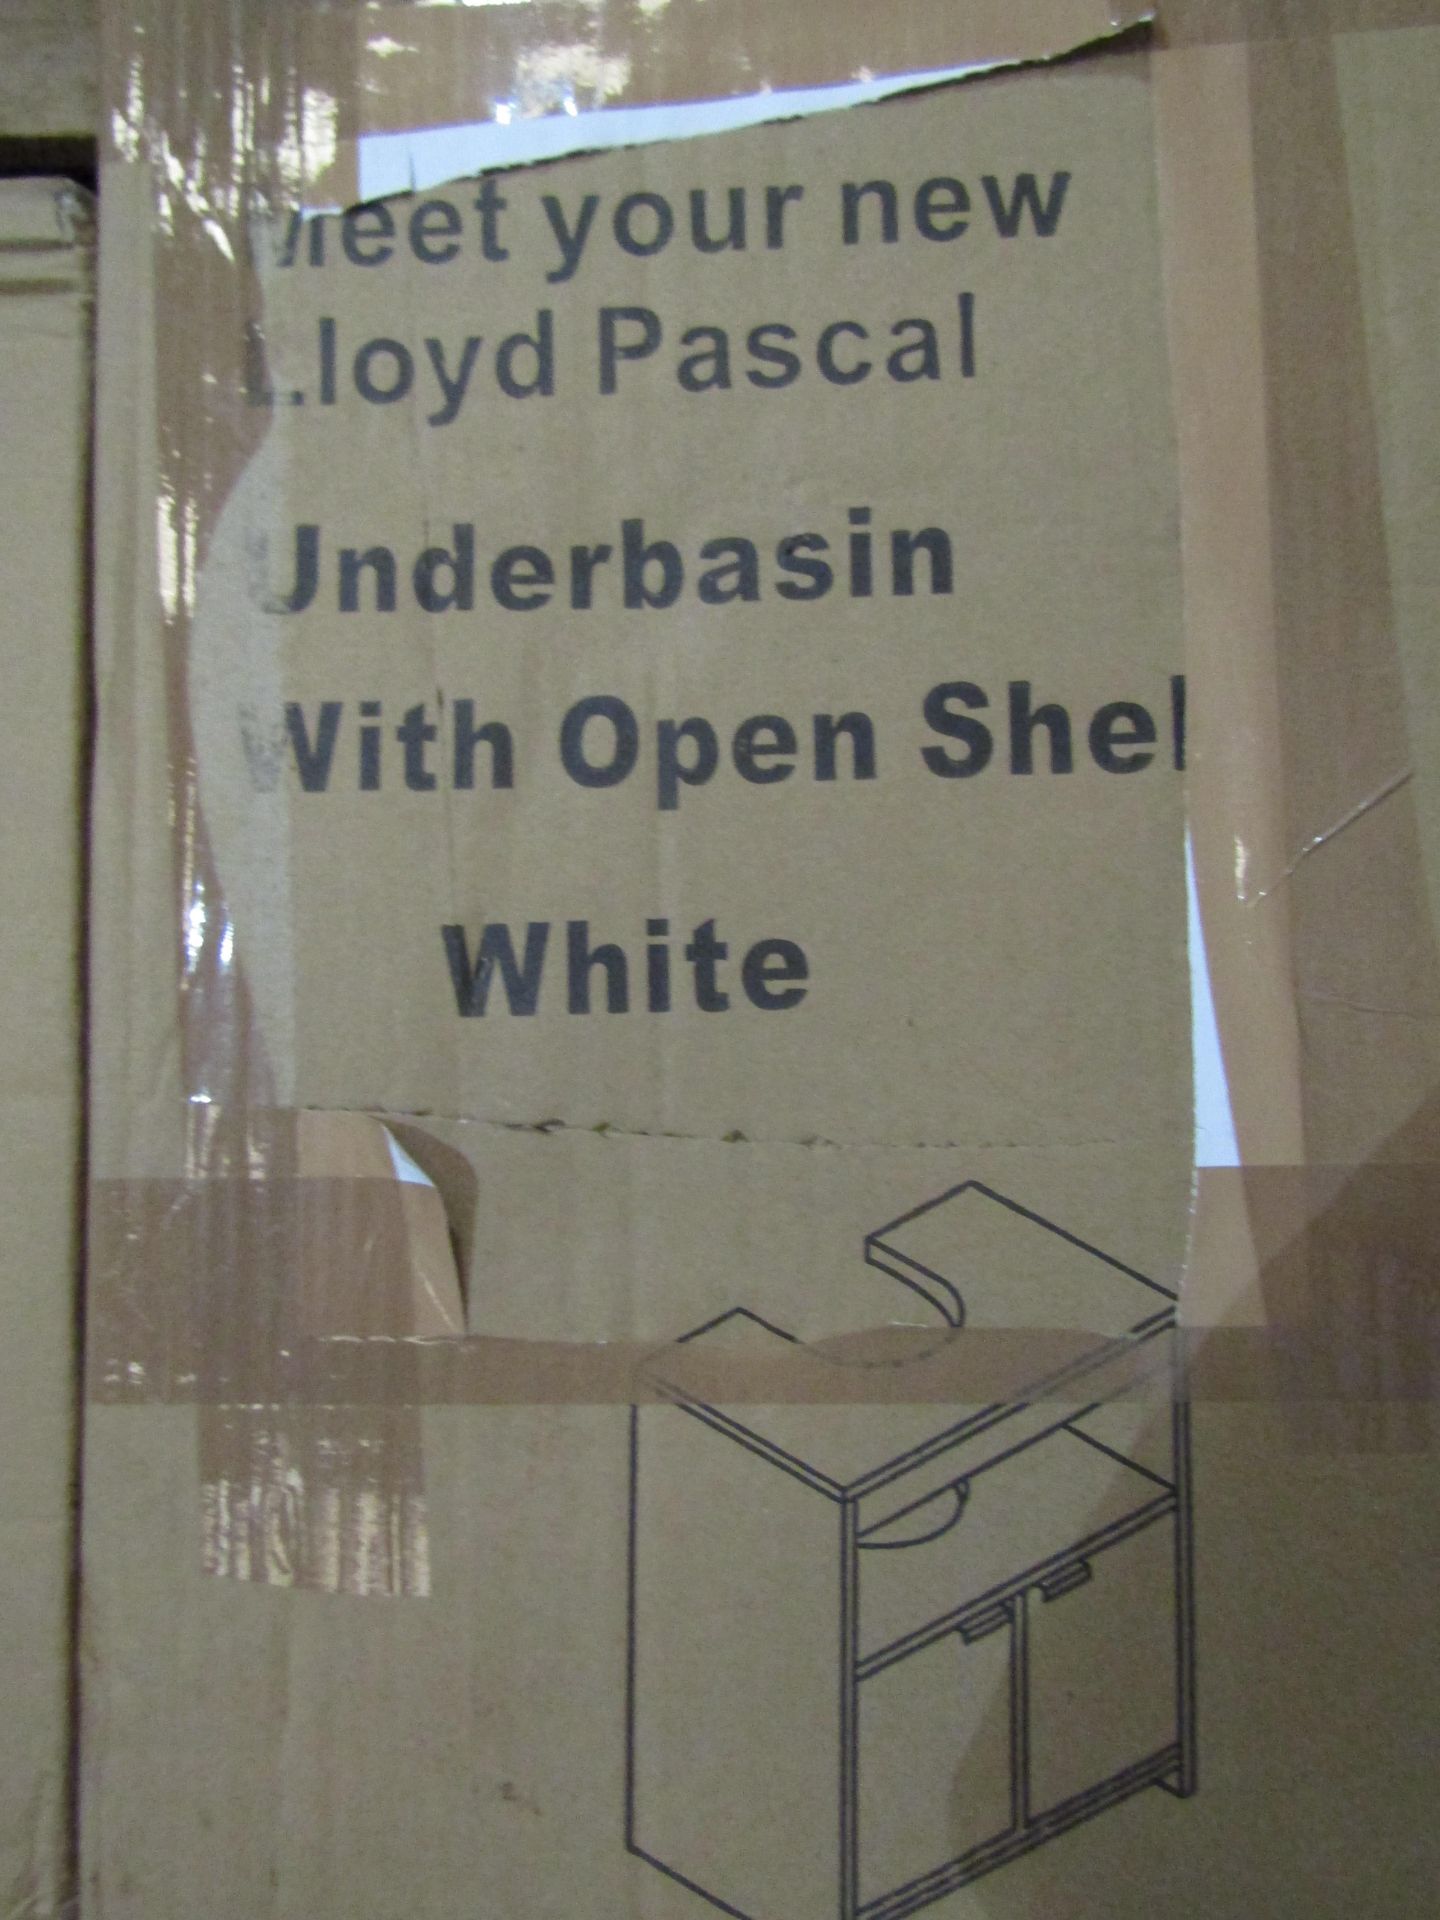 Lloyd Pascal Underbasin with Open Shelf, White. RRP £69 - Image 2 of 2